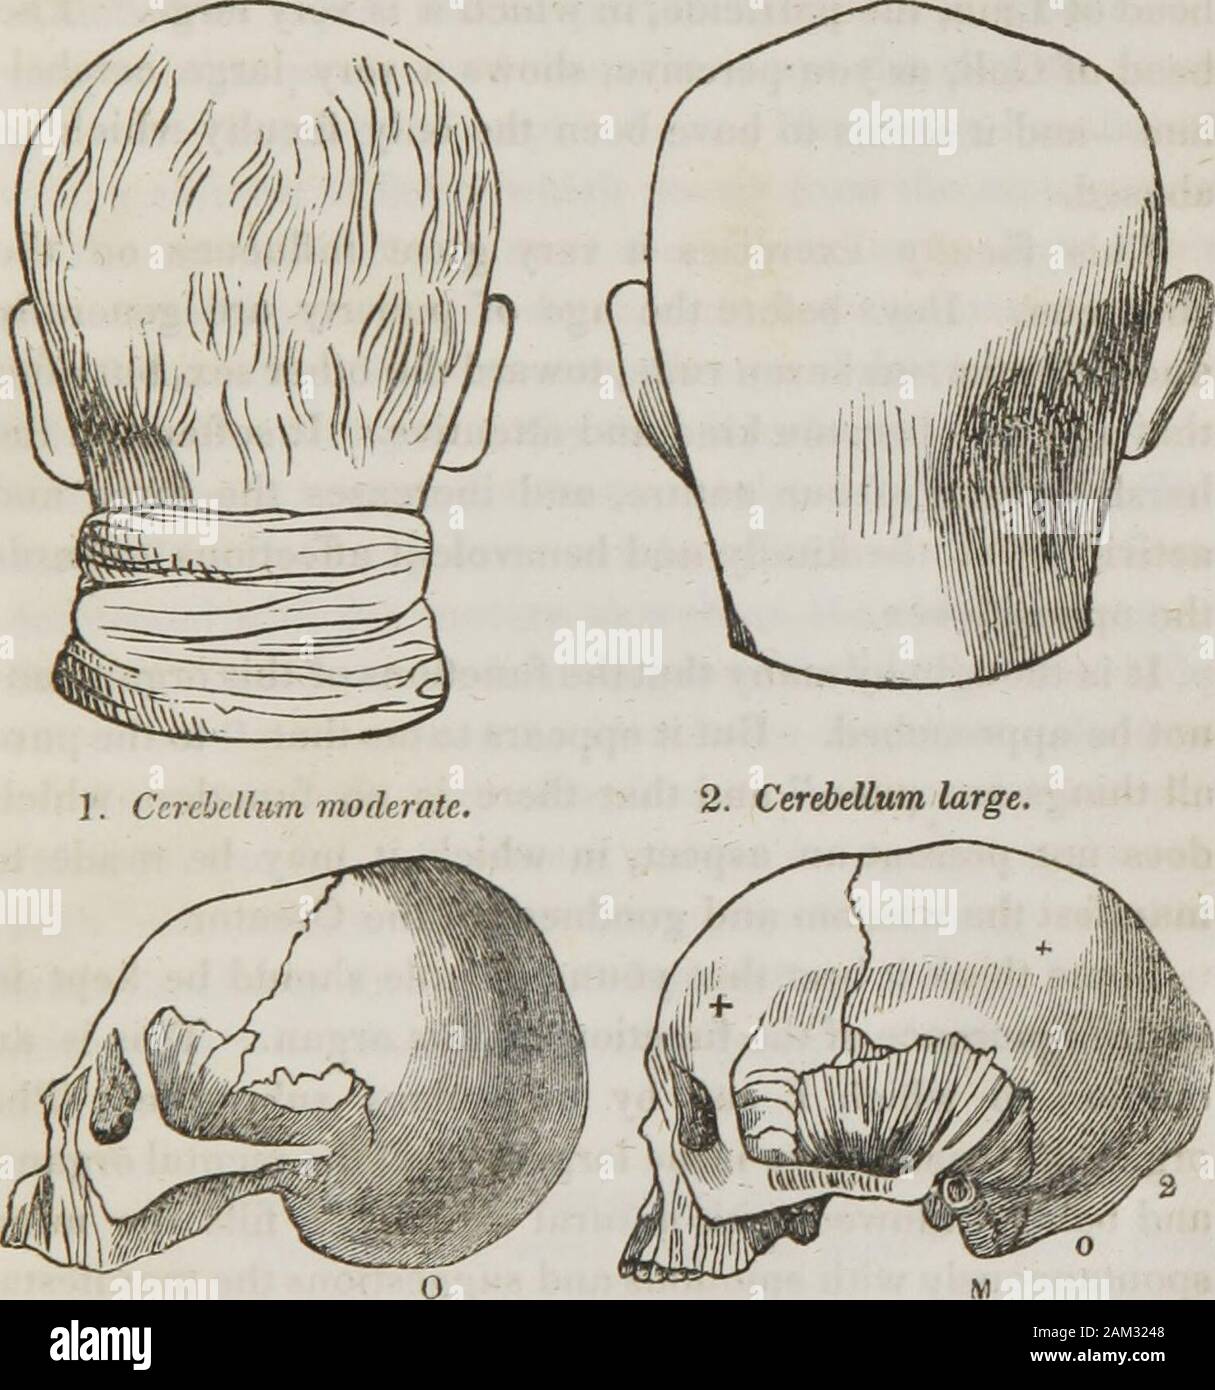 Lectures on phrenology : including its application to the present and prospective condition of the United States . SS. To learn the situation of this organ, feel on the middleline toward the base of the skull at the back part of thehead, and you will find a small bony projection named theoccipital spine. Amativeness is situated below that pointand between the mastoid processes. The size of the organis indicated by the extension of the inferior surface of the AMATIVENESS. 137 occipital bone backward and downward, or by the thick-ness of the neck at these parts between the ears. Its largesize gi Stock Photo